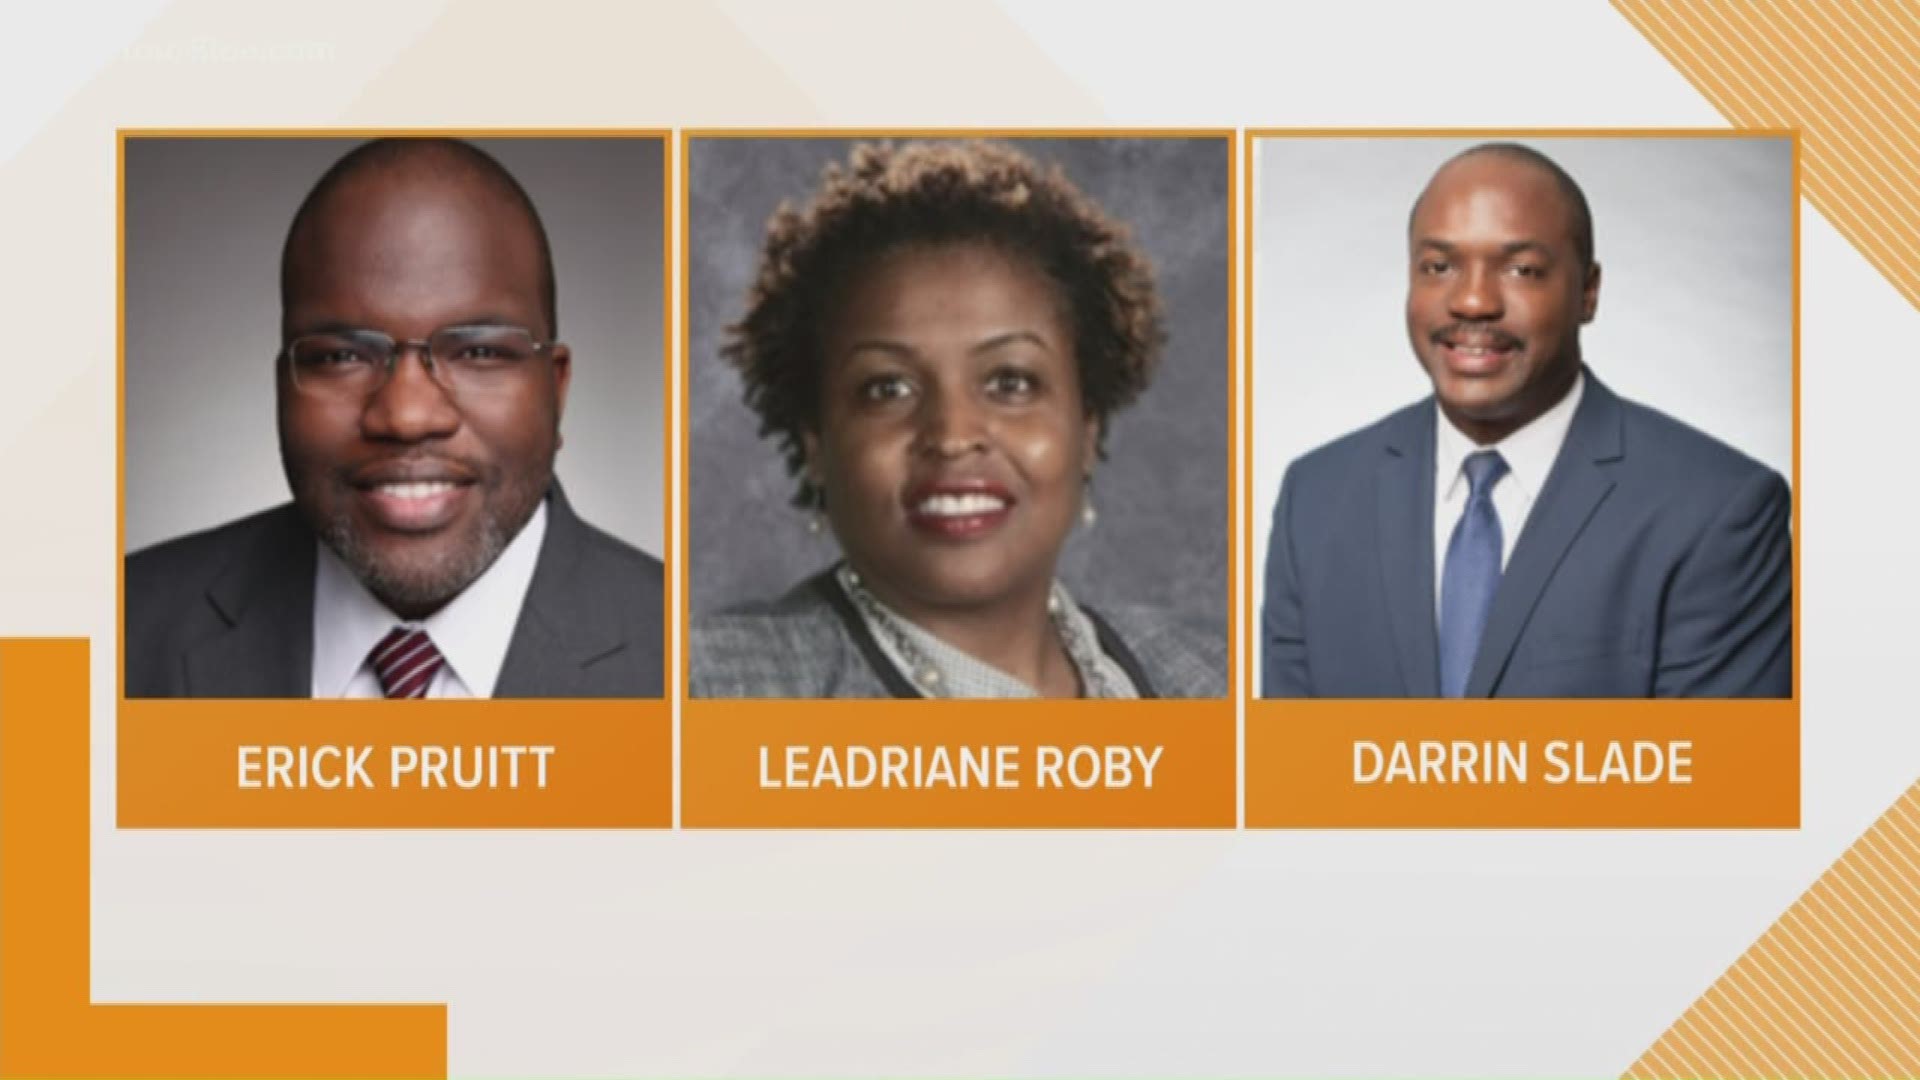 Grand Rapids Public Schools' leadership have narrowed the field of candidates for superintendent down to three people and expect to interview them Monday.